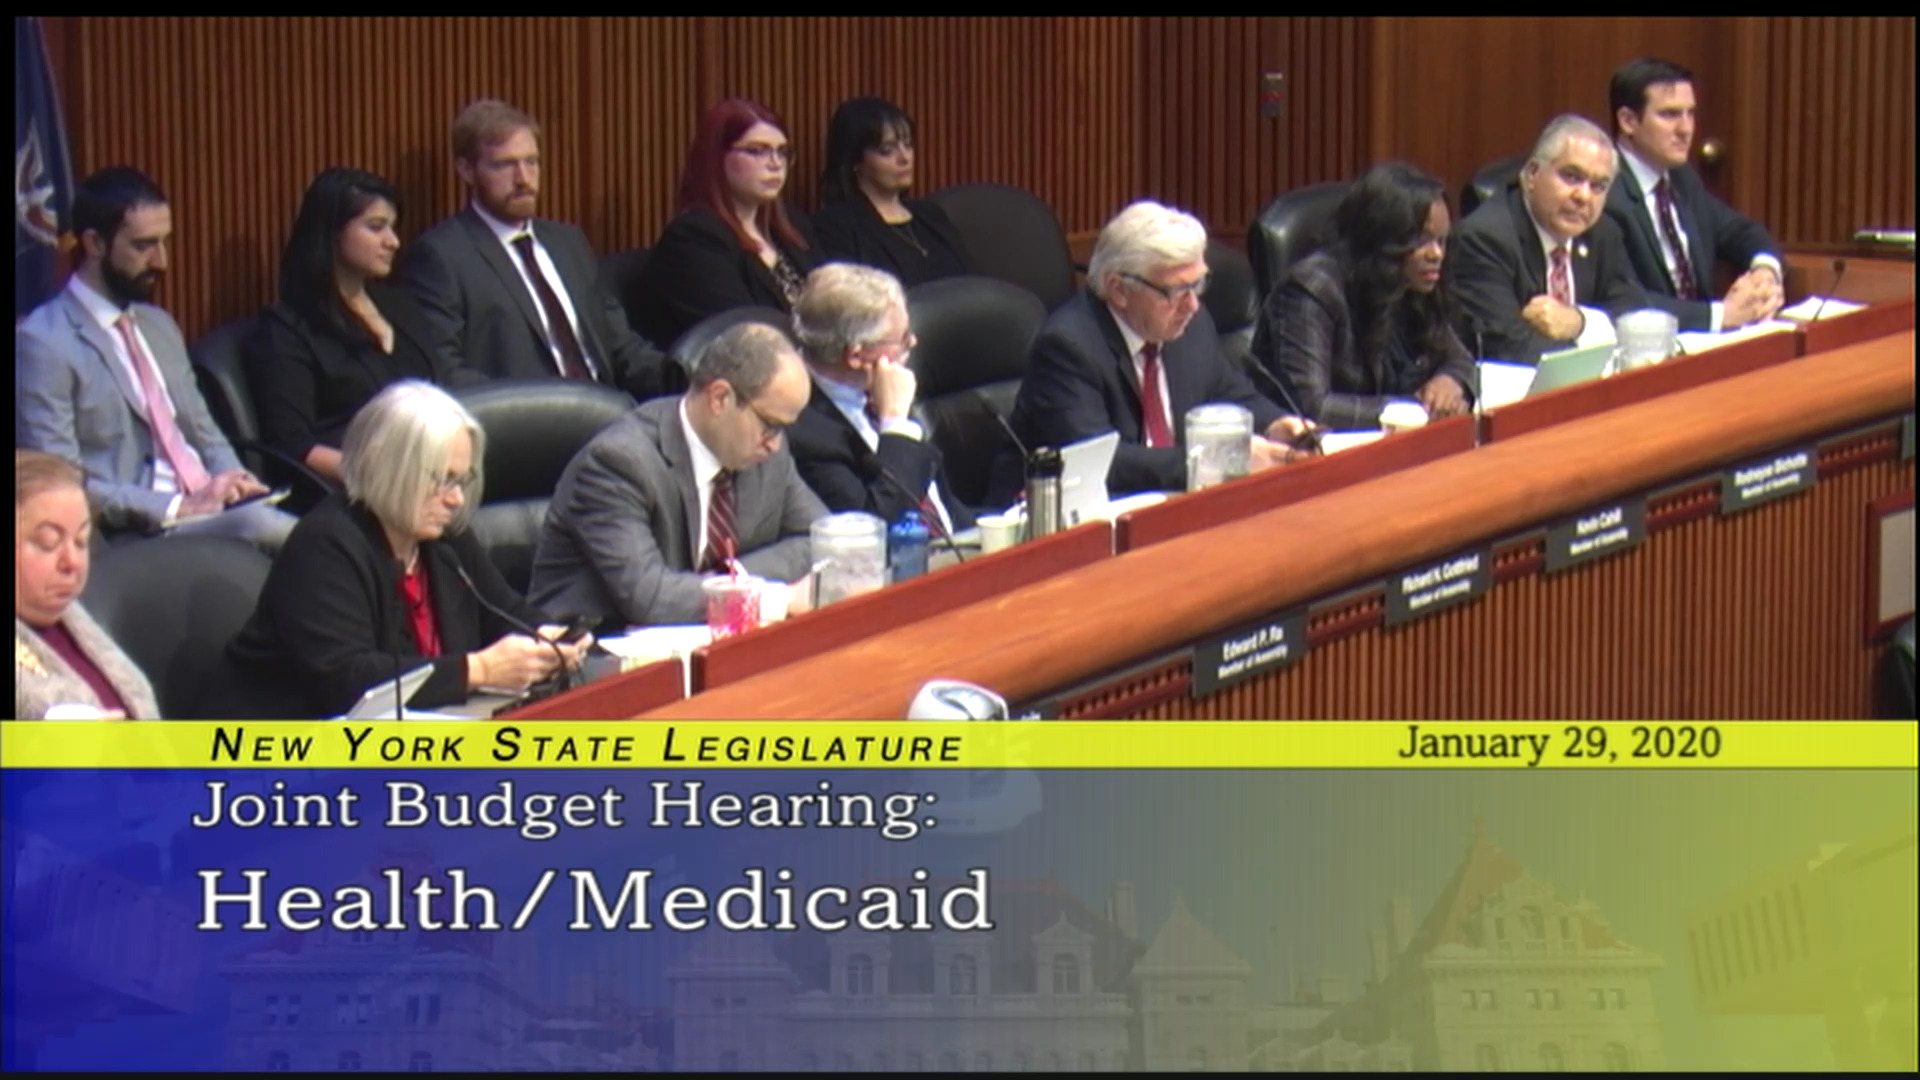 2020 Joint Budget Hearing on Health